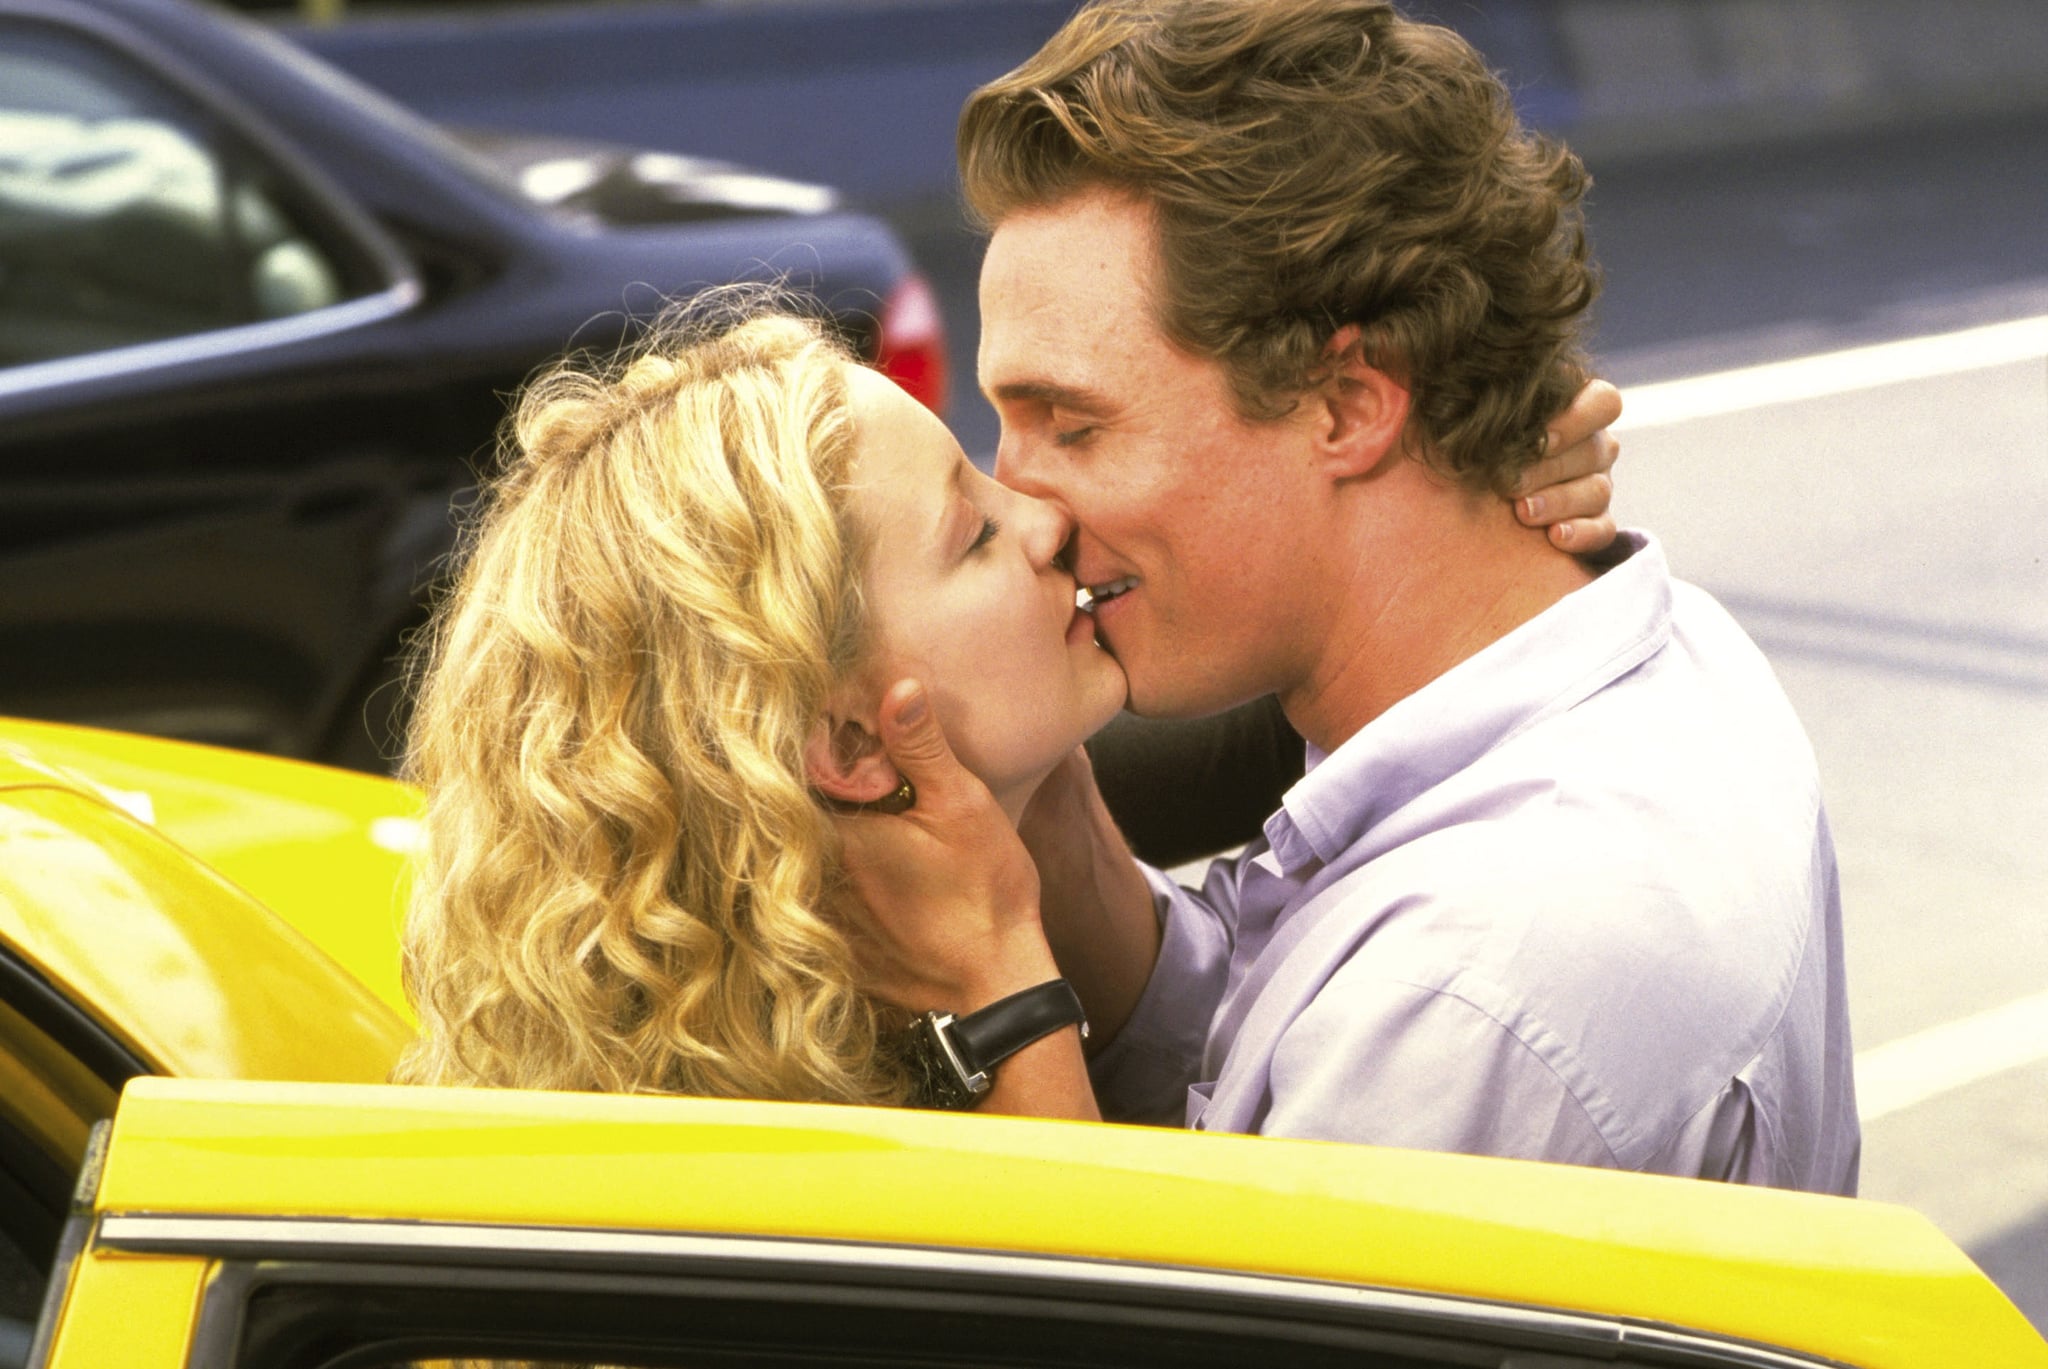 HOW TO LOSE A GUY IN 10 DAYS, Kate Hudson, Matthew McConaughey, 2003. Paramount/courtesy Everett Collection